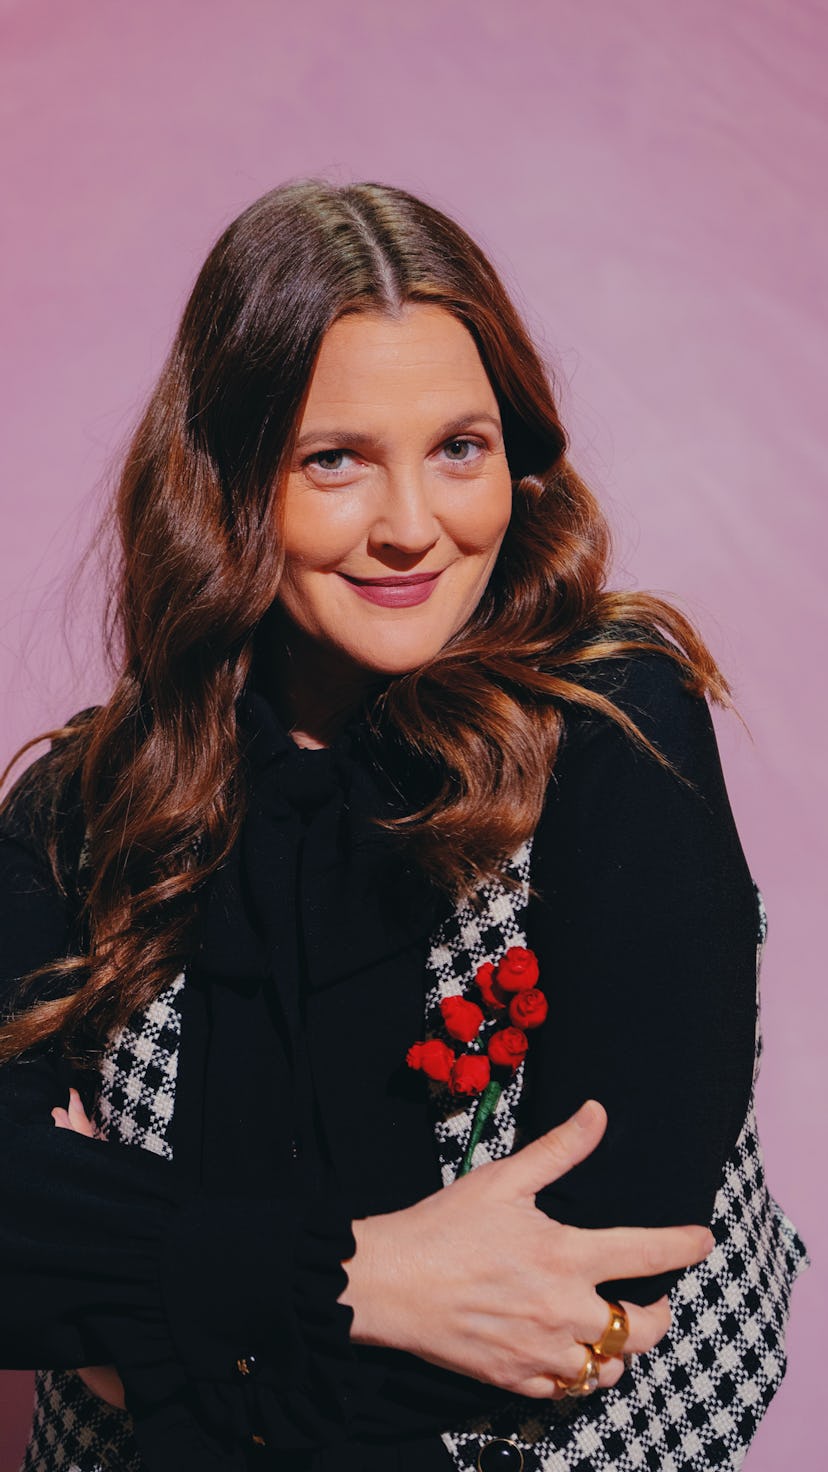 Drew Barrymore tackles parenting in her own way.